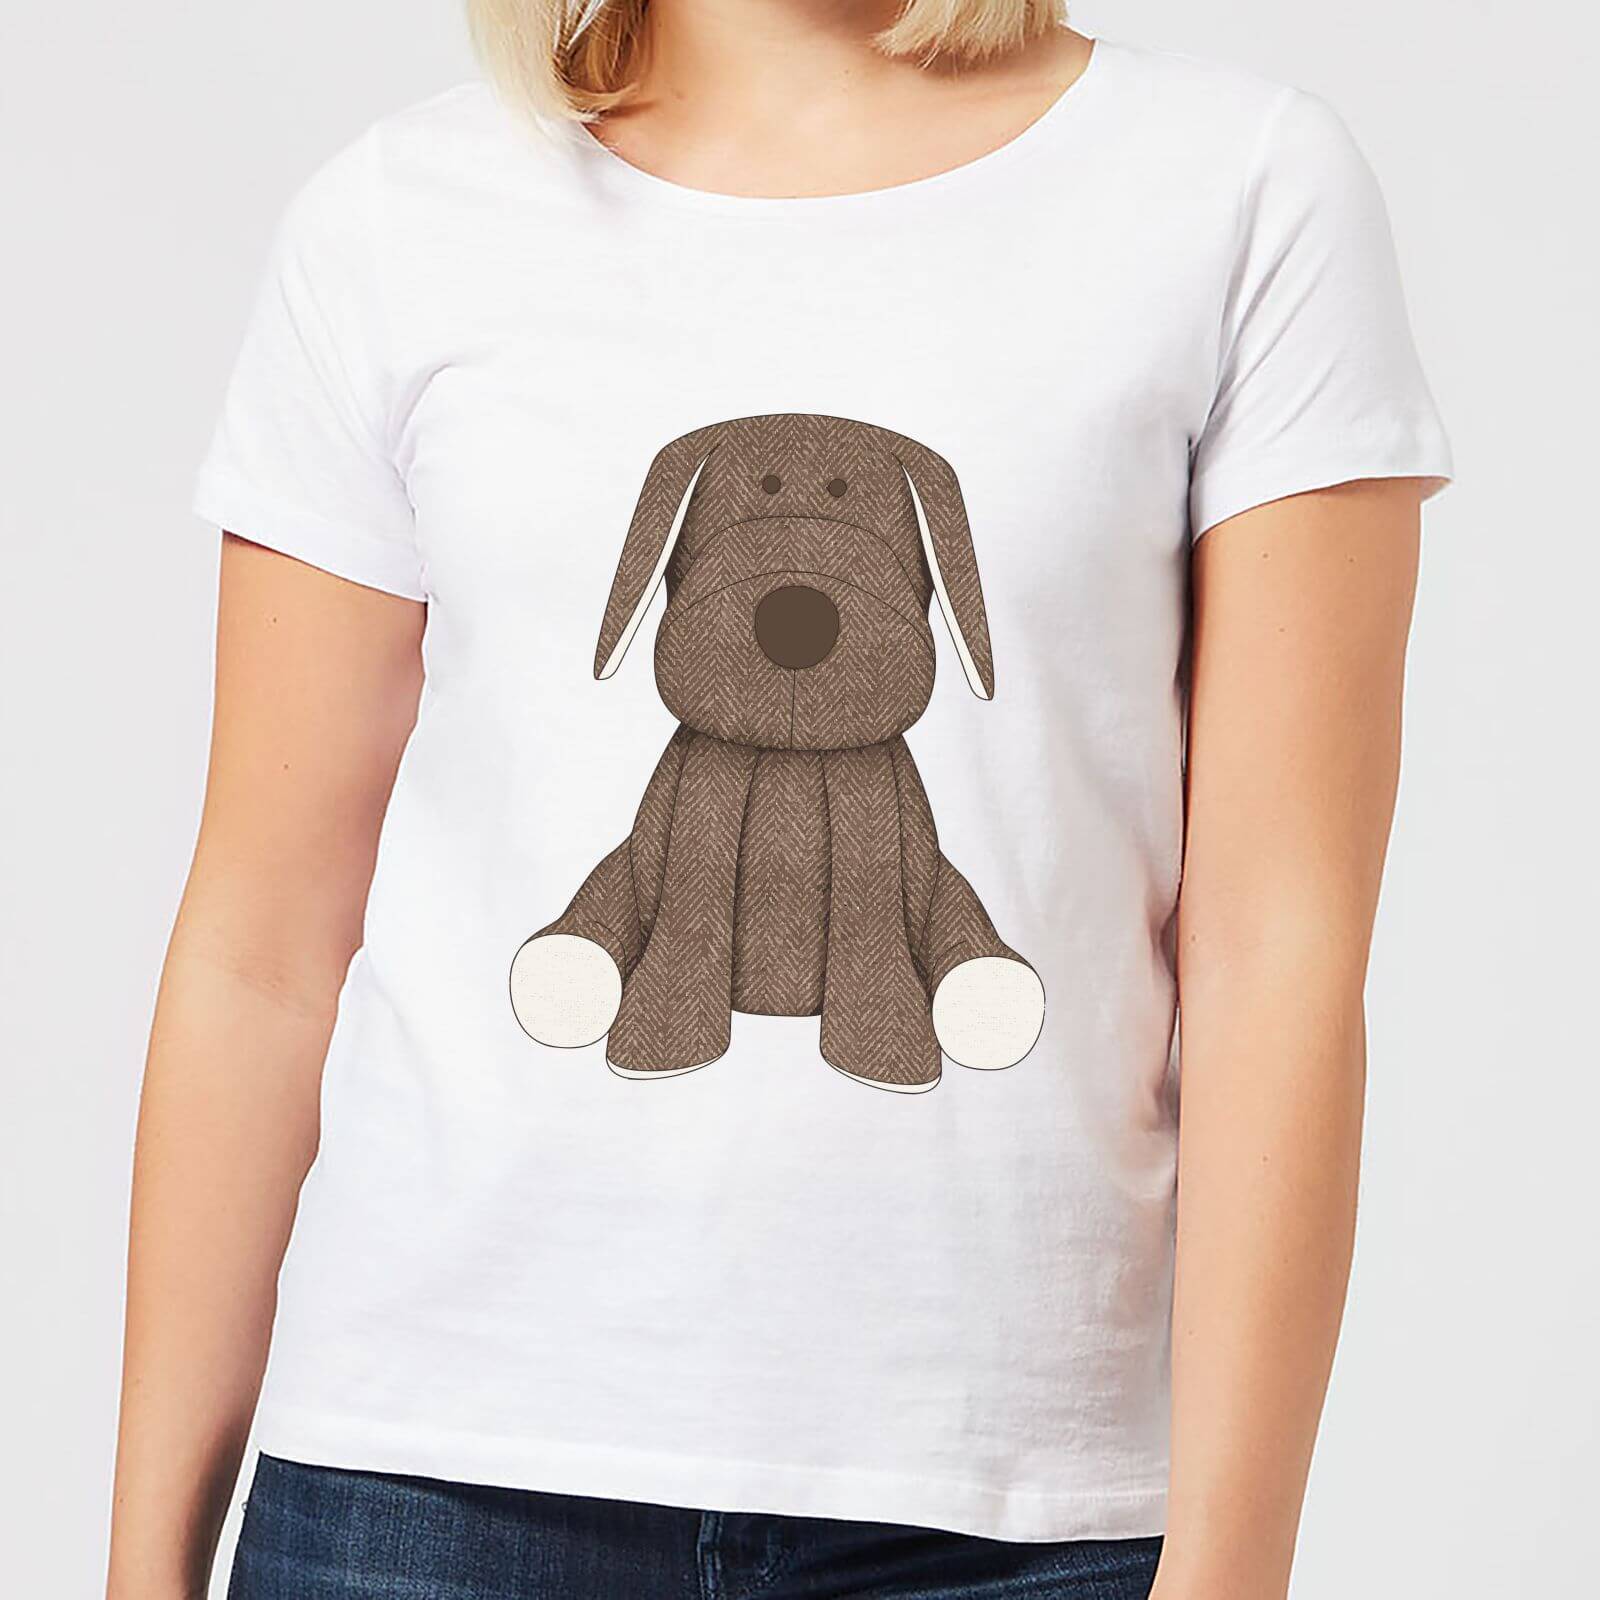 Candlelight Brown Dog Teddy Women's T-Shirt - White - S - White